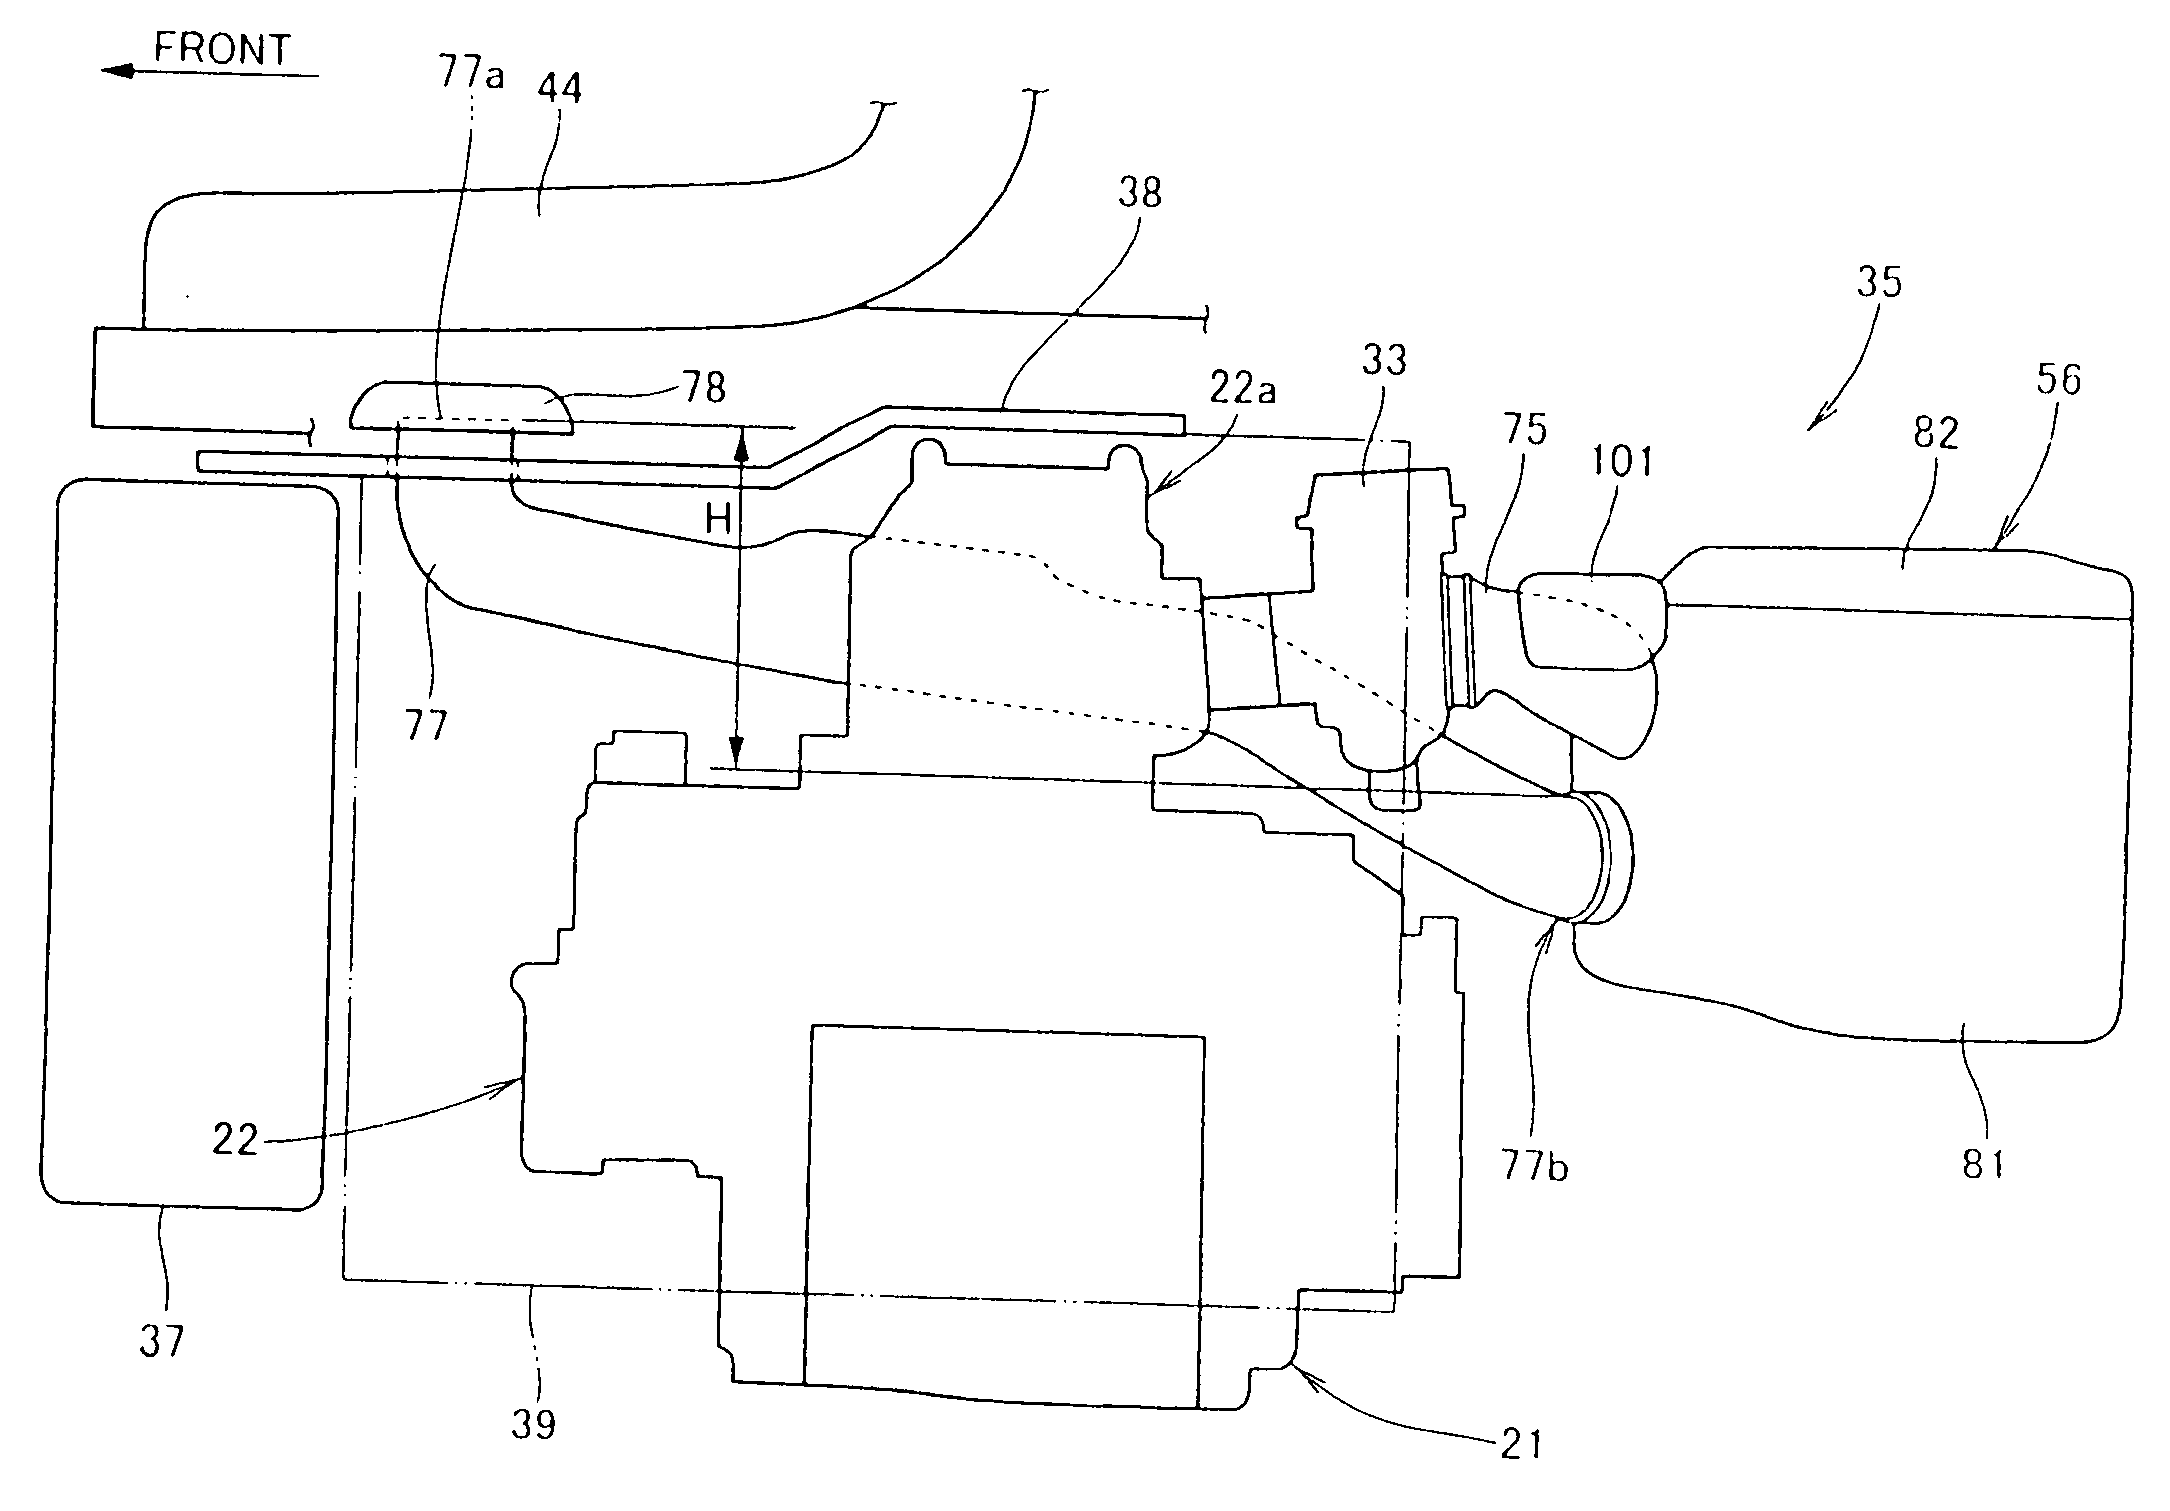 Air cleaner device in vehicle